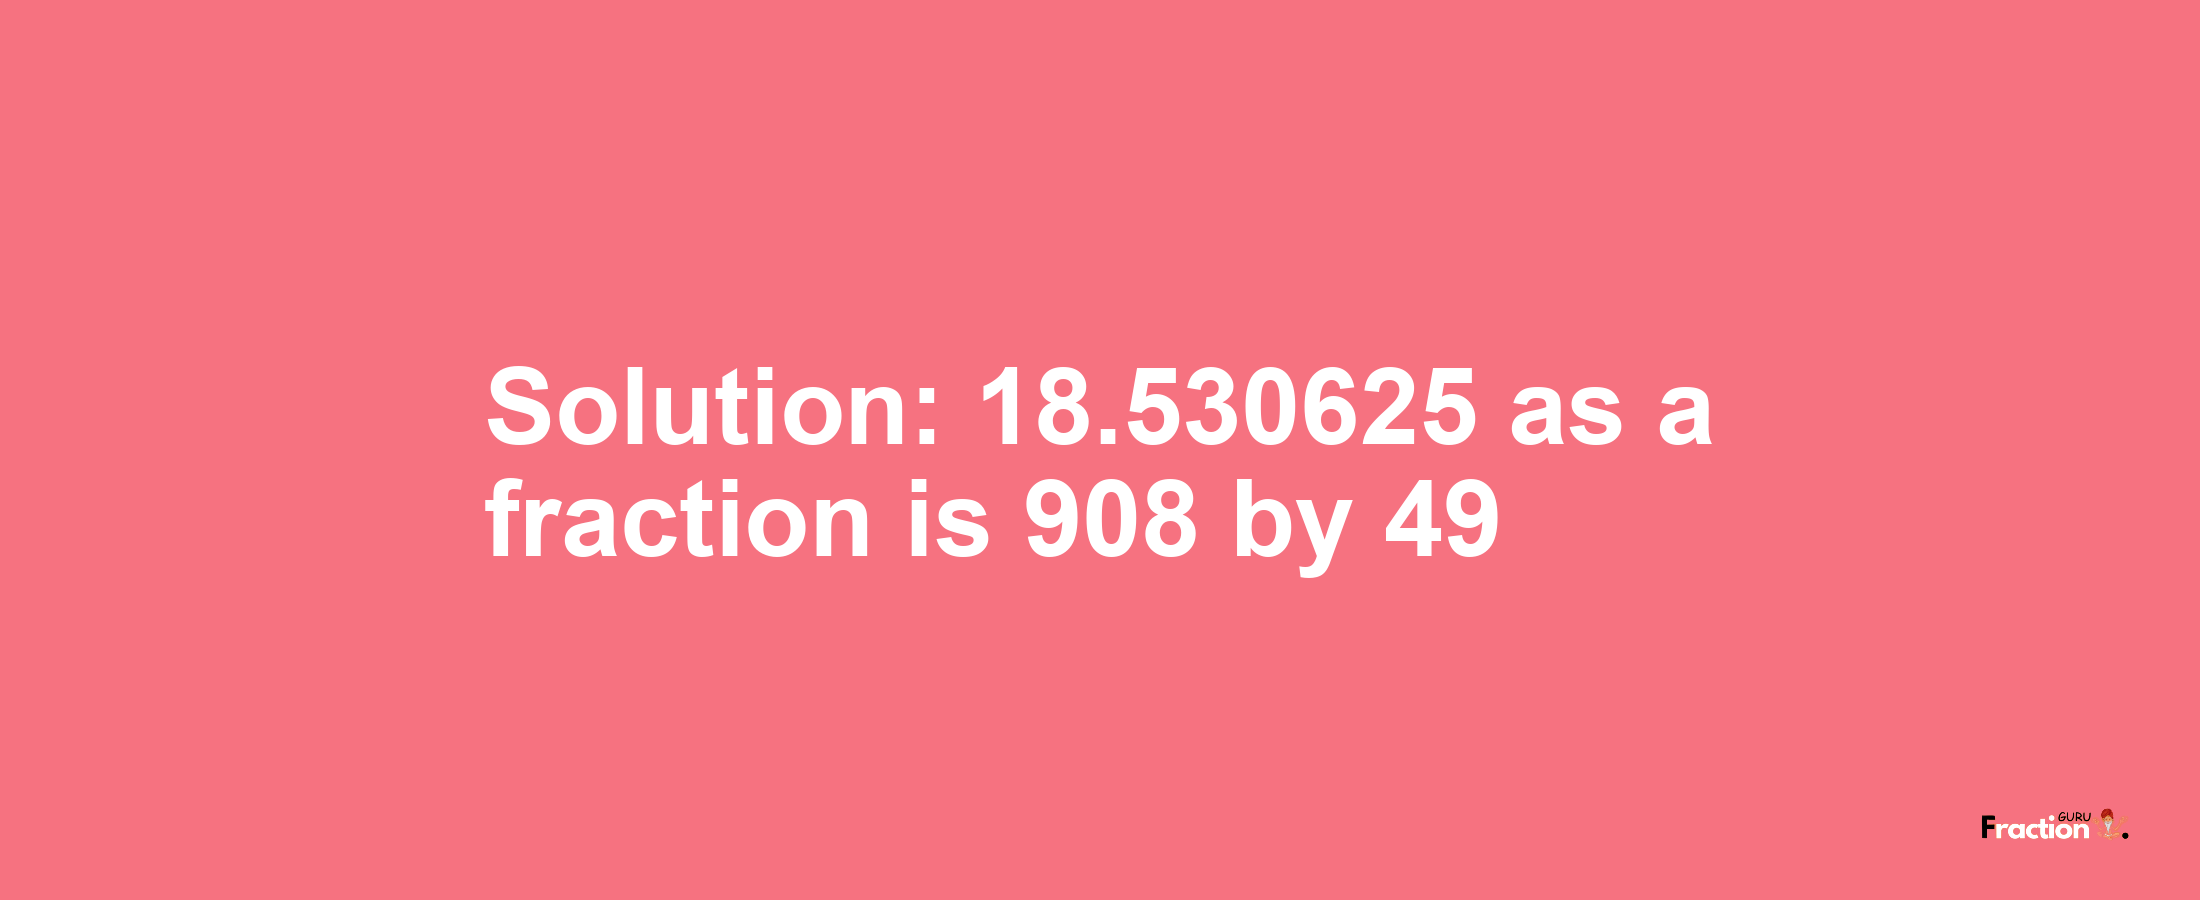 Solution:18.530625 as a fraction is 908/49